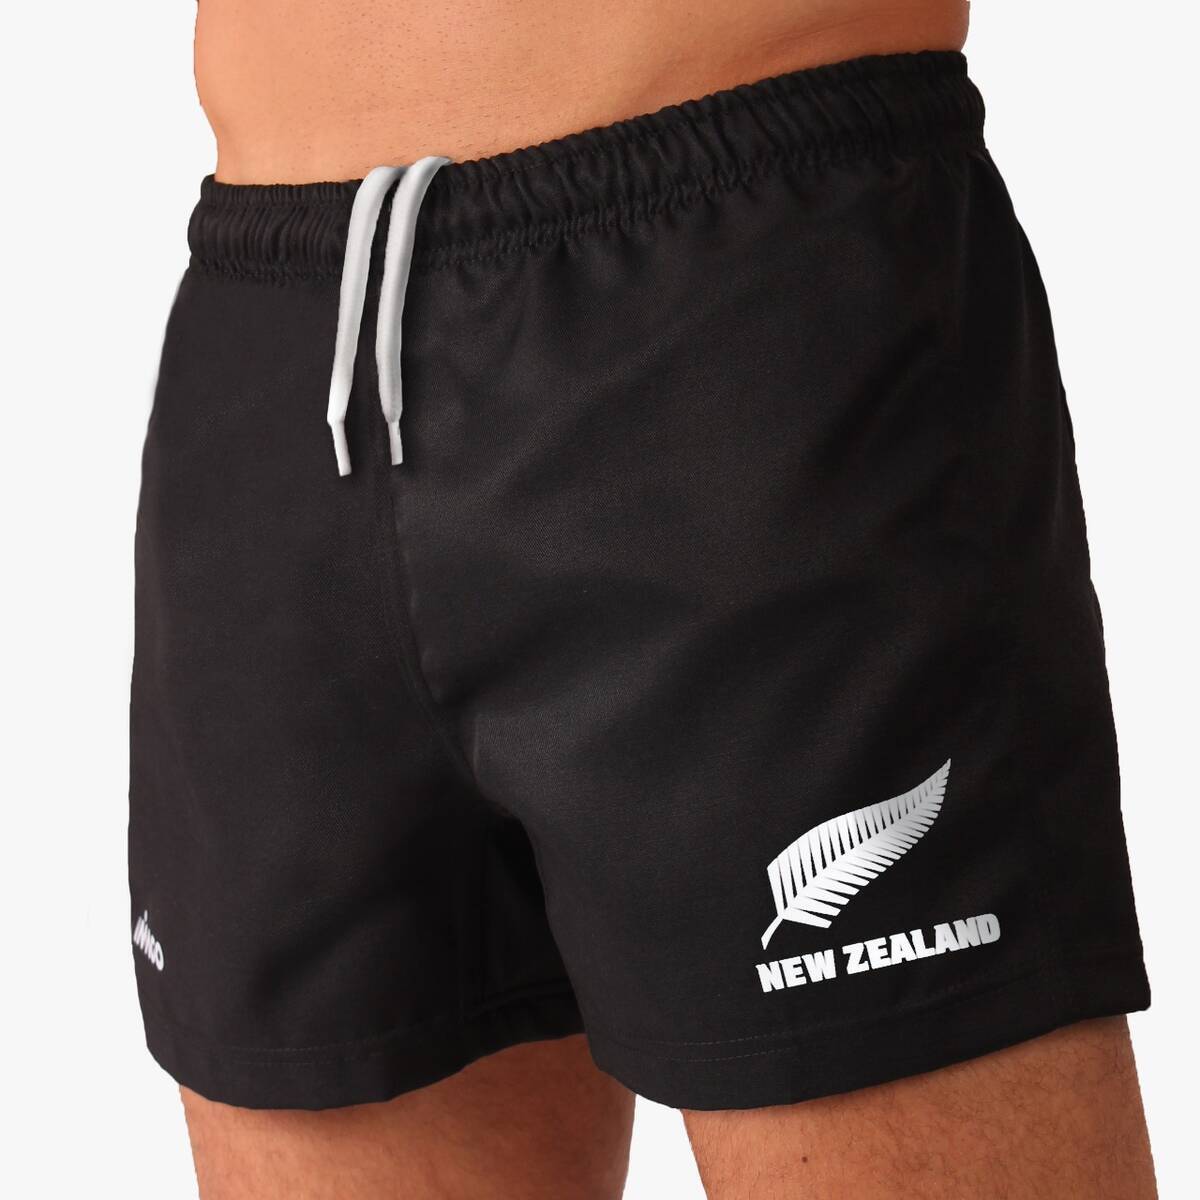 Imagen producto Short Rugby New Zealand 11